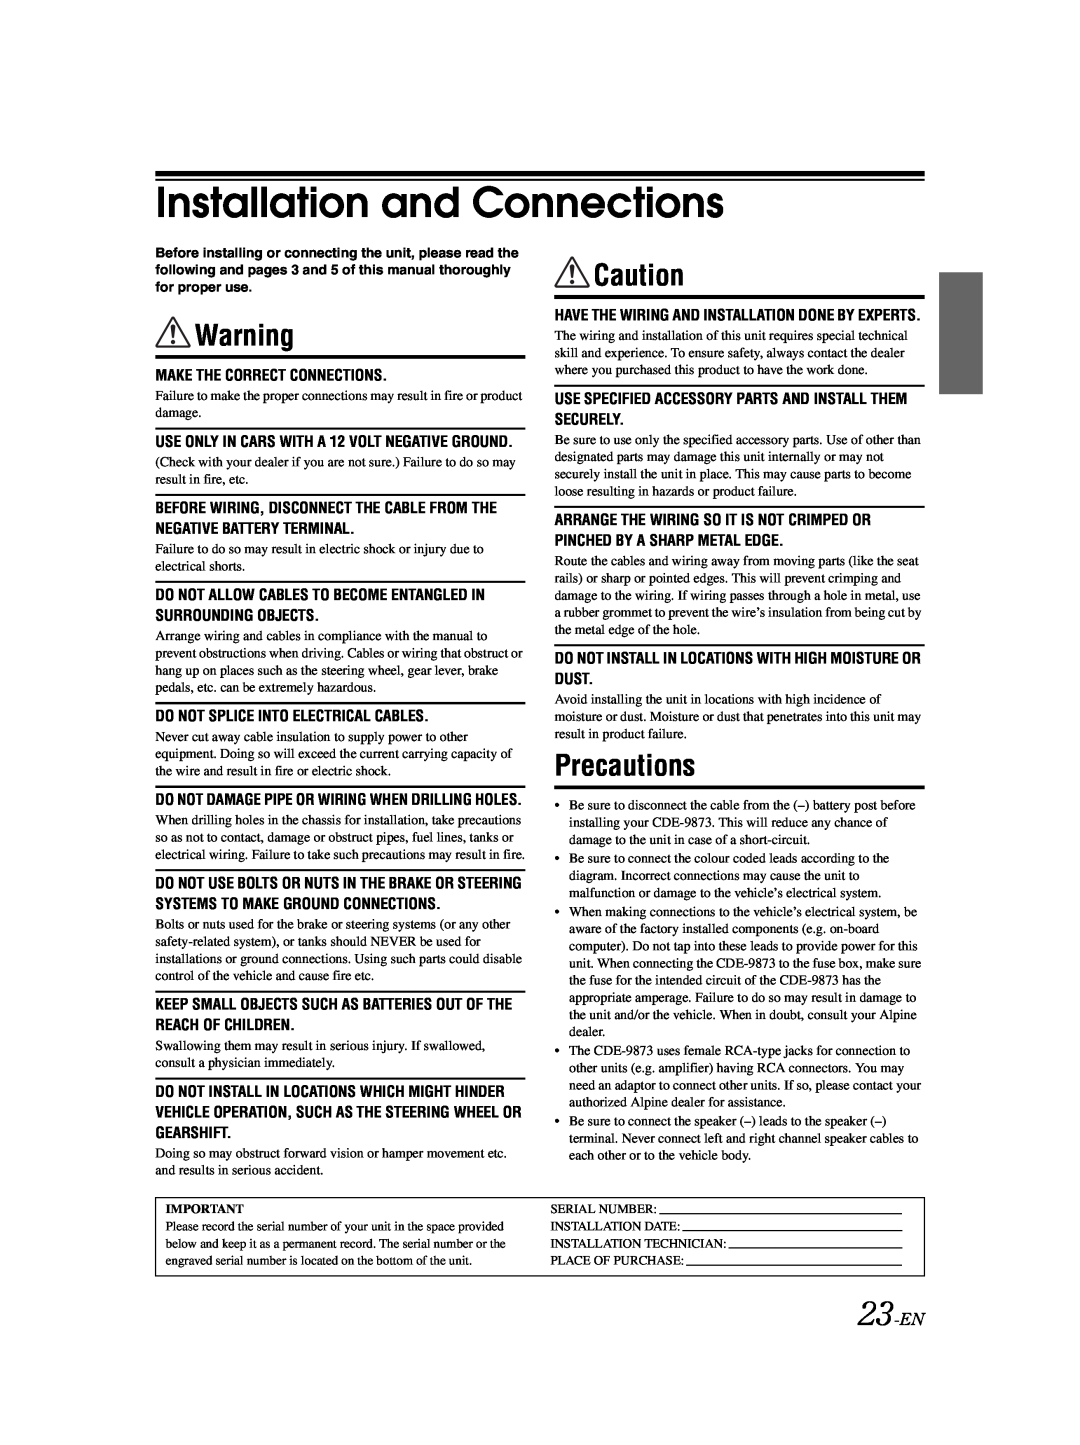 Alpine CDE-9873 owner manual Installation and Connections, Precautions, 23-EN 